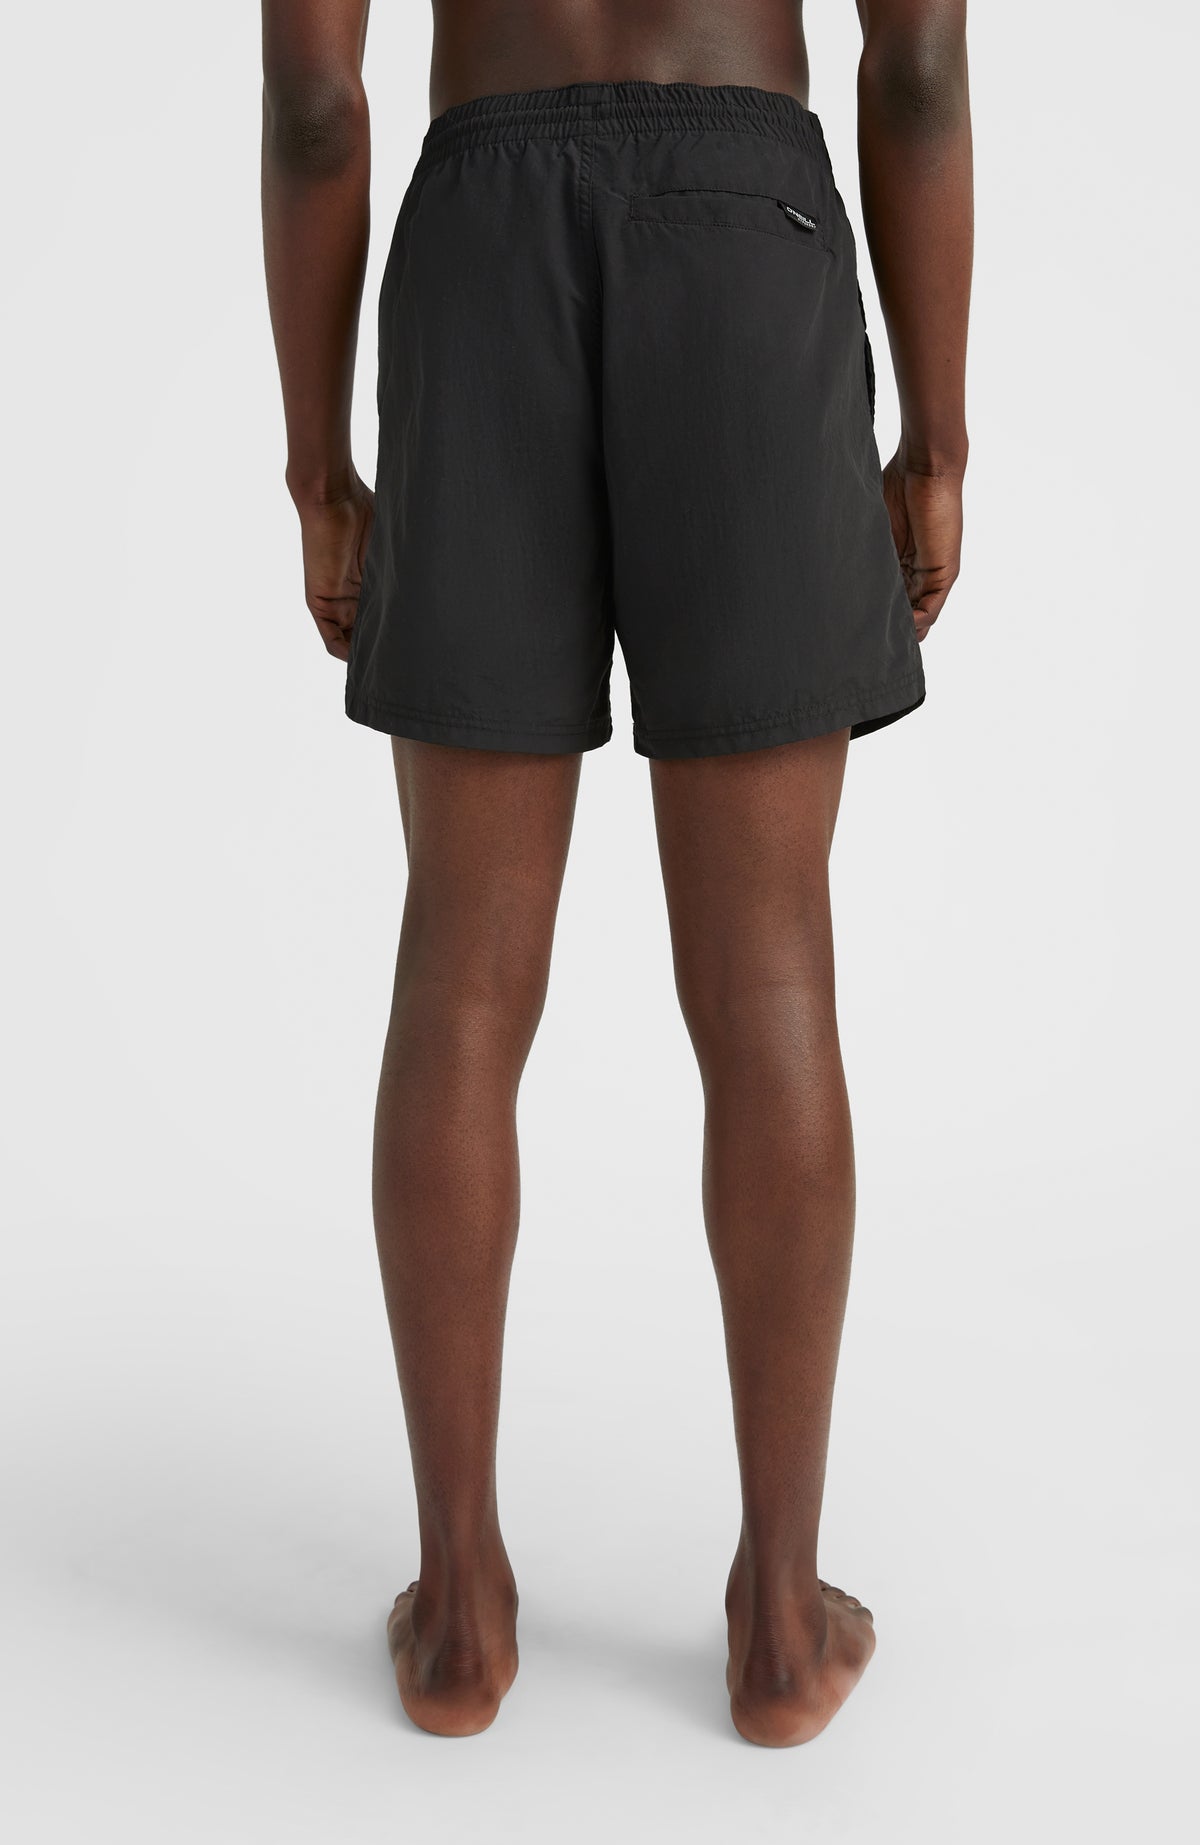 Cali Melted Print '' Swim Shorts   Black Out – O'Neill